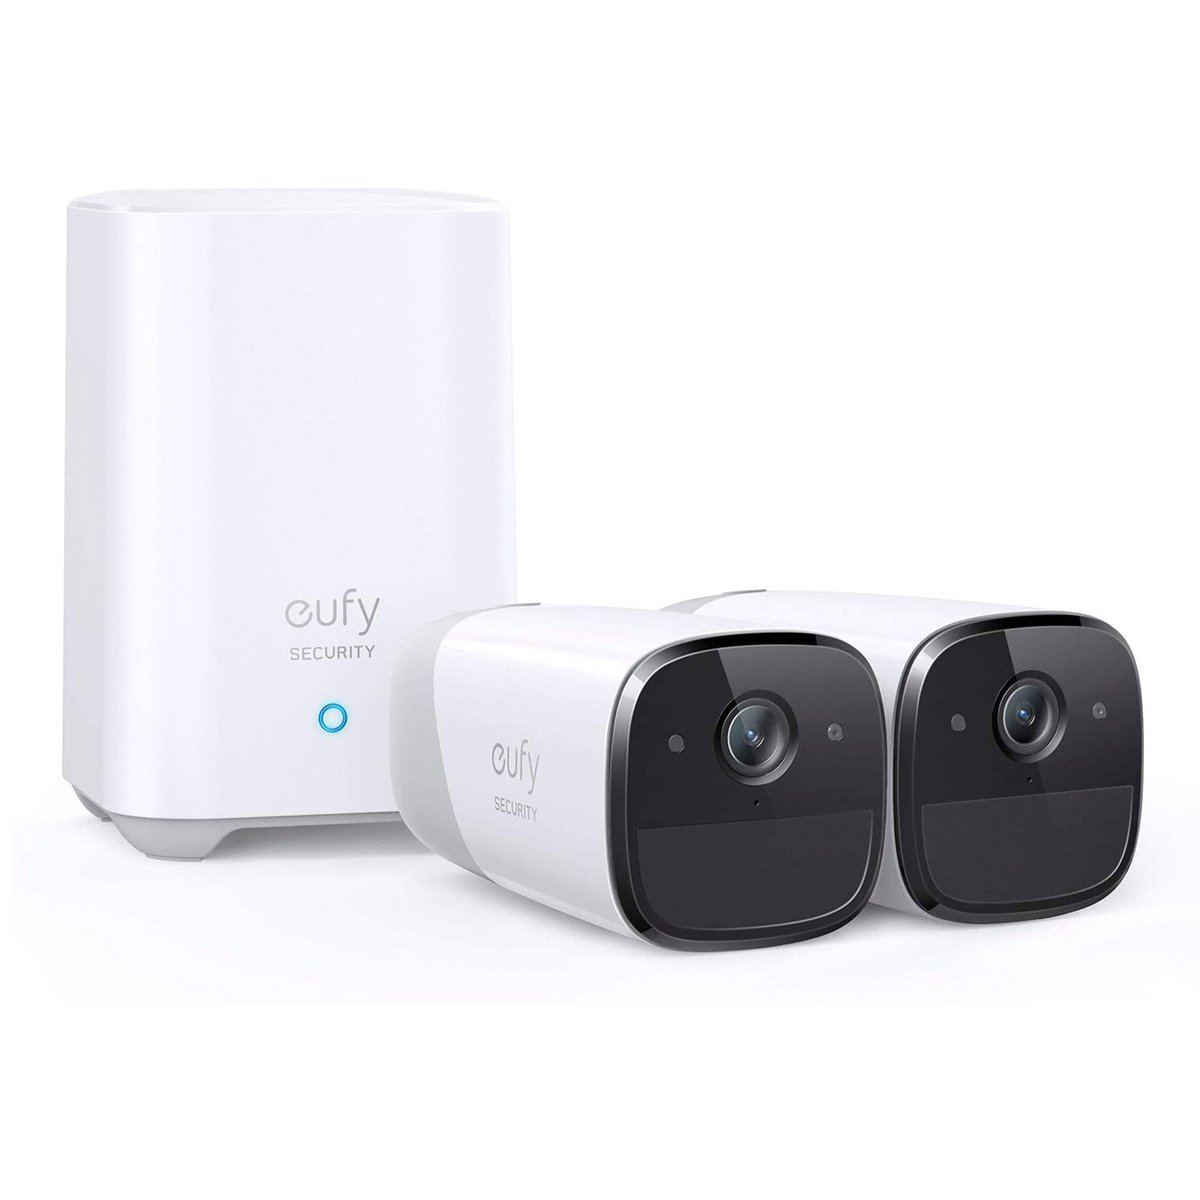 Eufy T88513 Security, eufyCam 2 Pro Wireless Home Security Camera System, 365-Day Battery Life, HomeKit Compatibility, 2K Resolution, IP67 Weatherproof, Night Vision, 2-Cam Kit